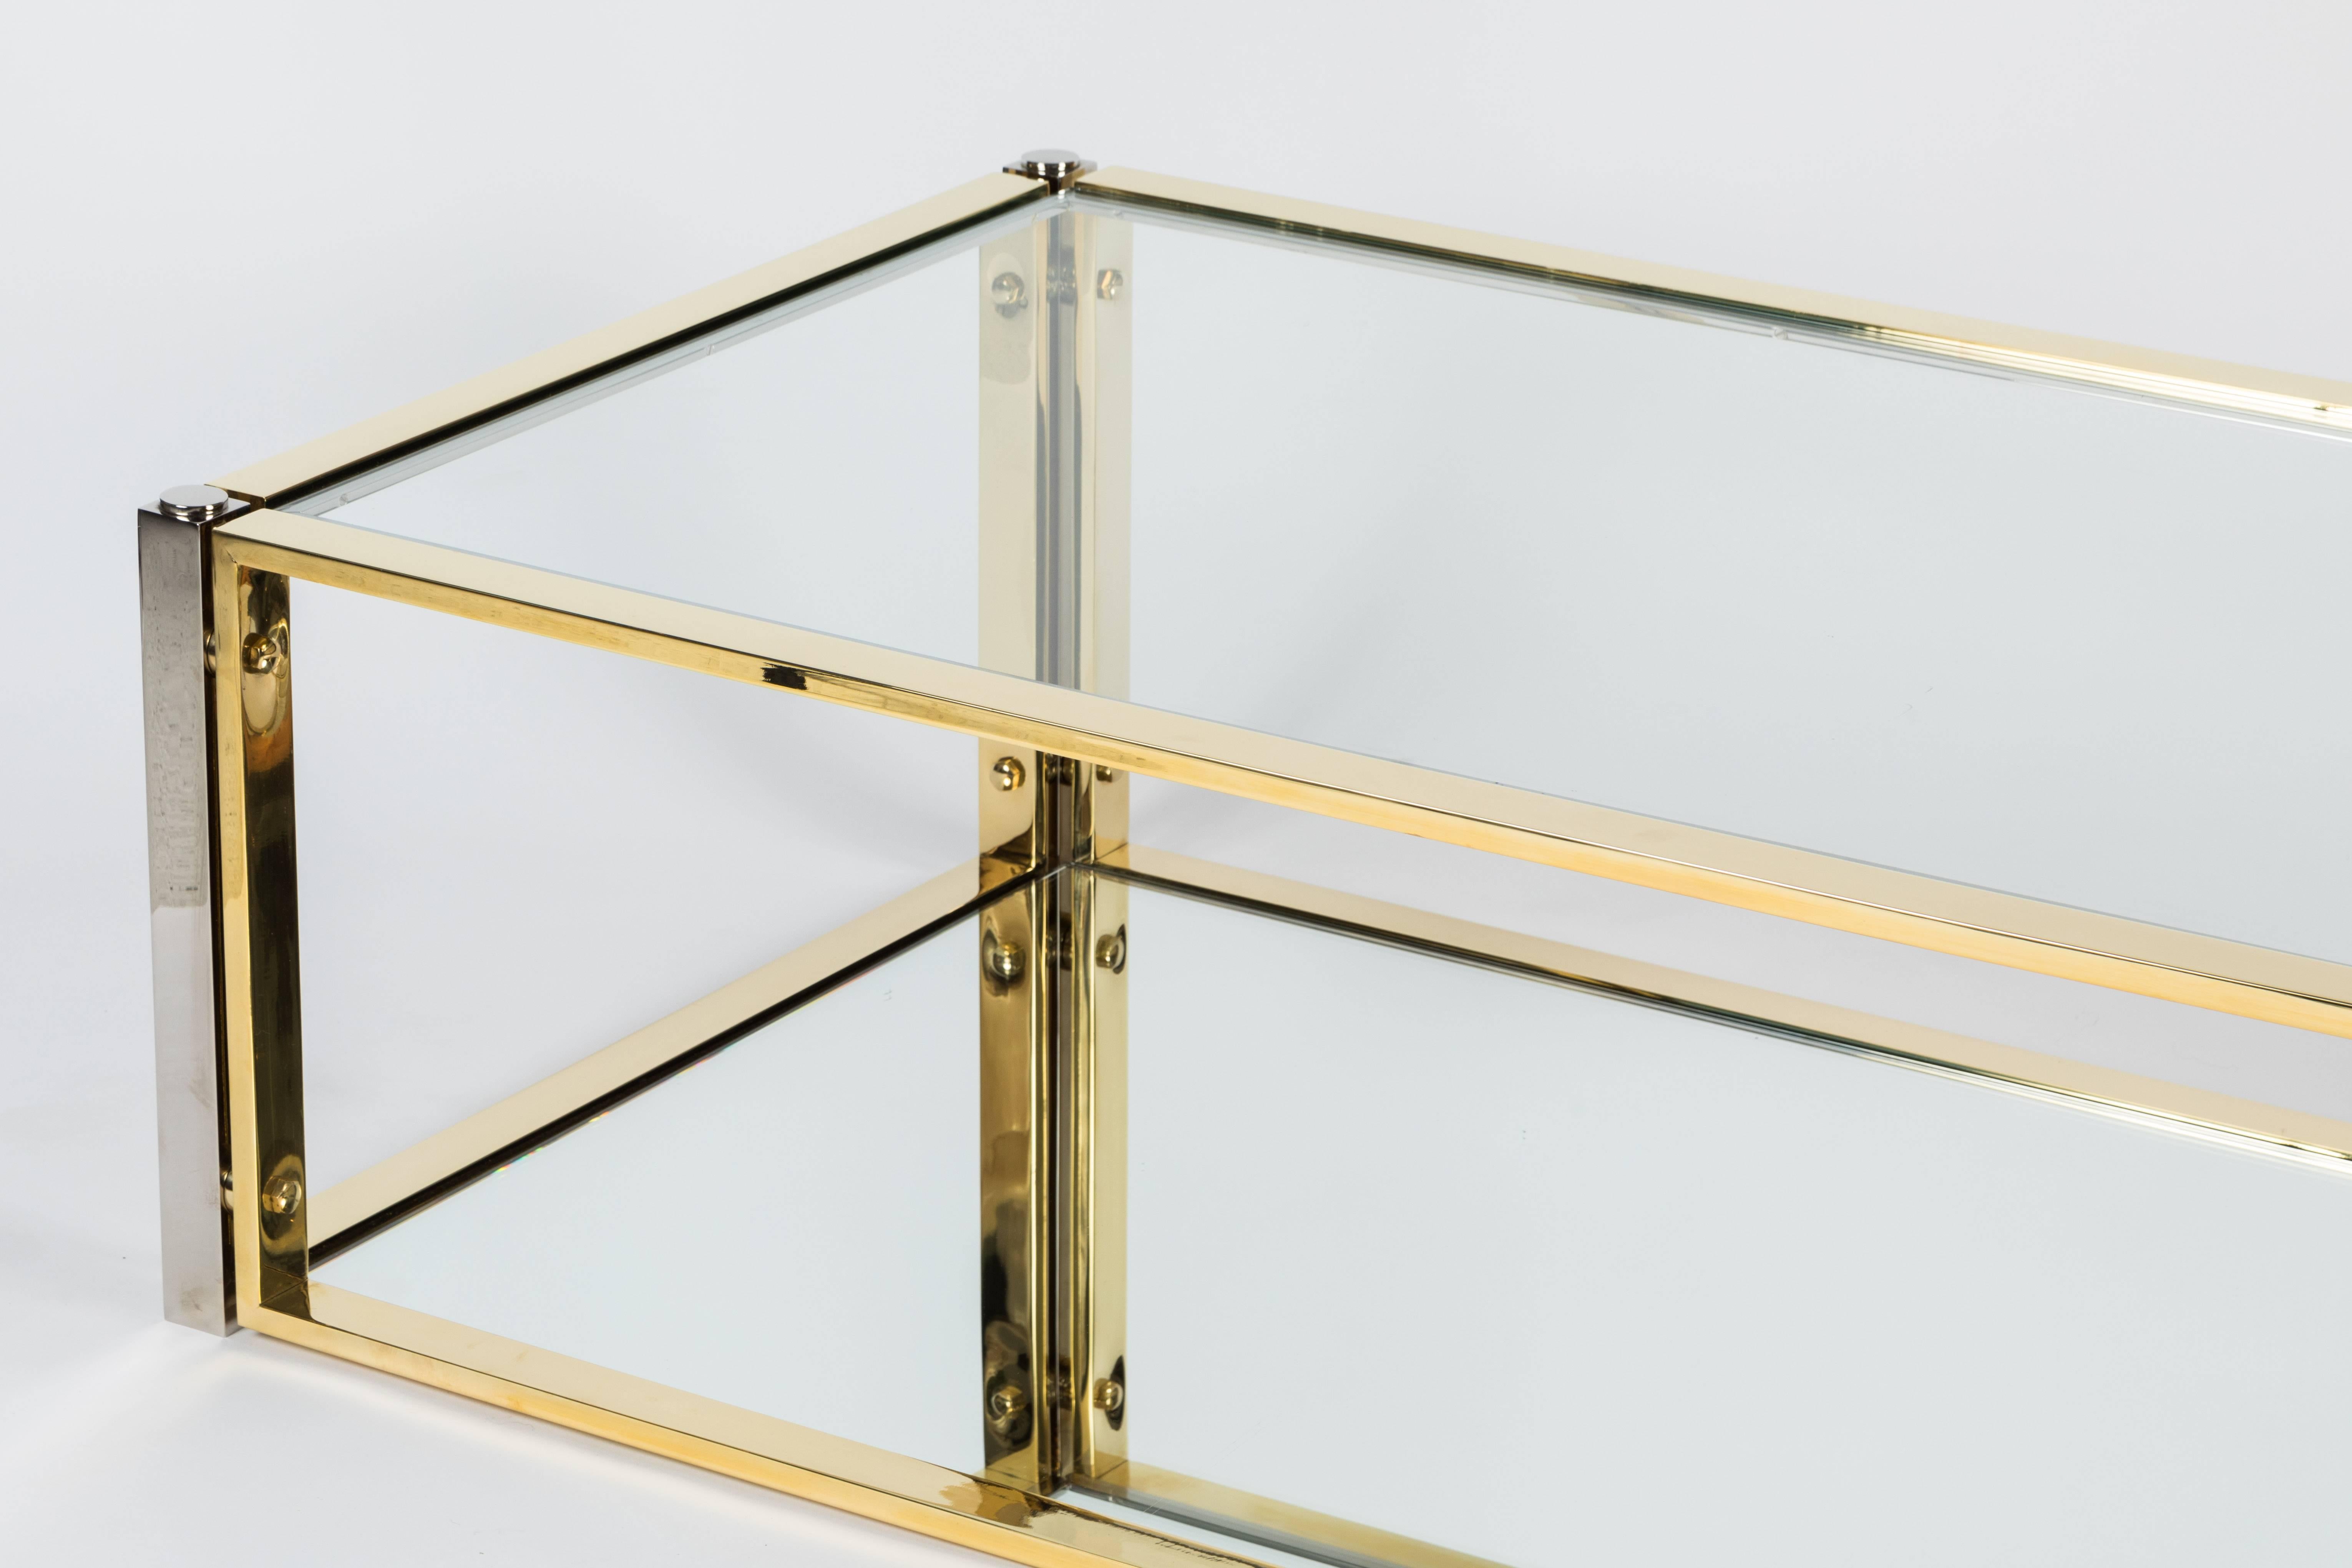 Super stylish rectangular cocktail table in a mix of polished brass and chrome. The bottom level of table is accentuated by mirror while the top is glass. Beautifully restored and ready to use.